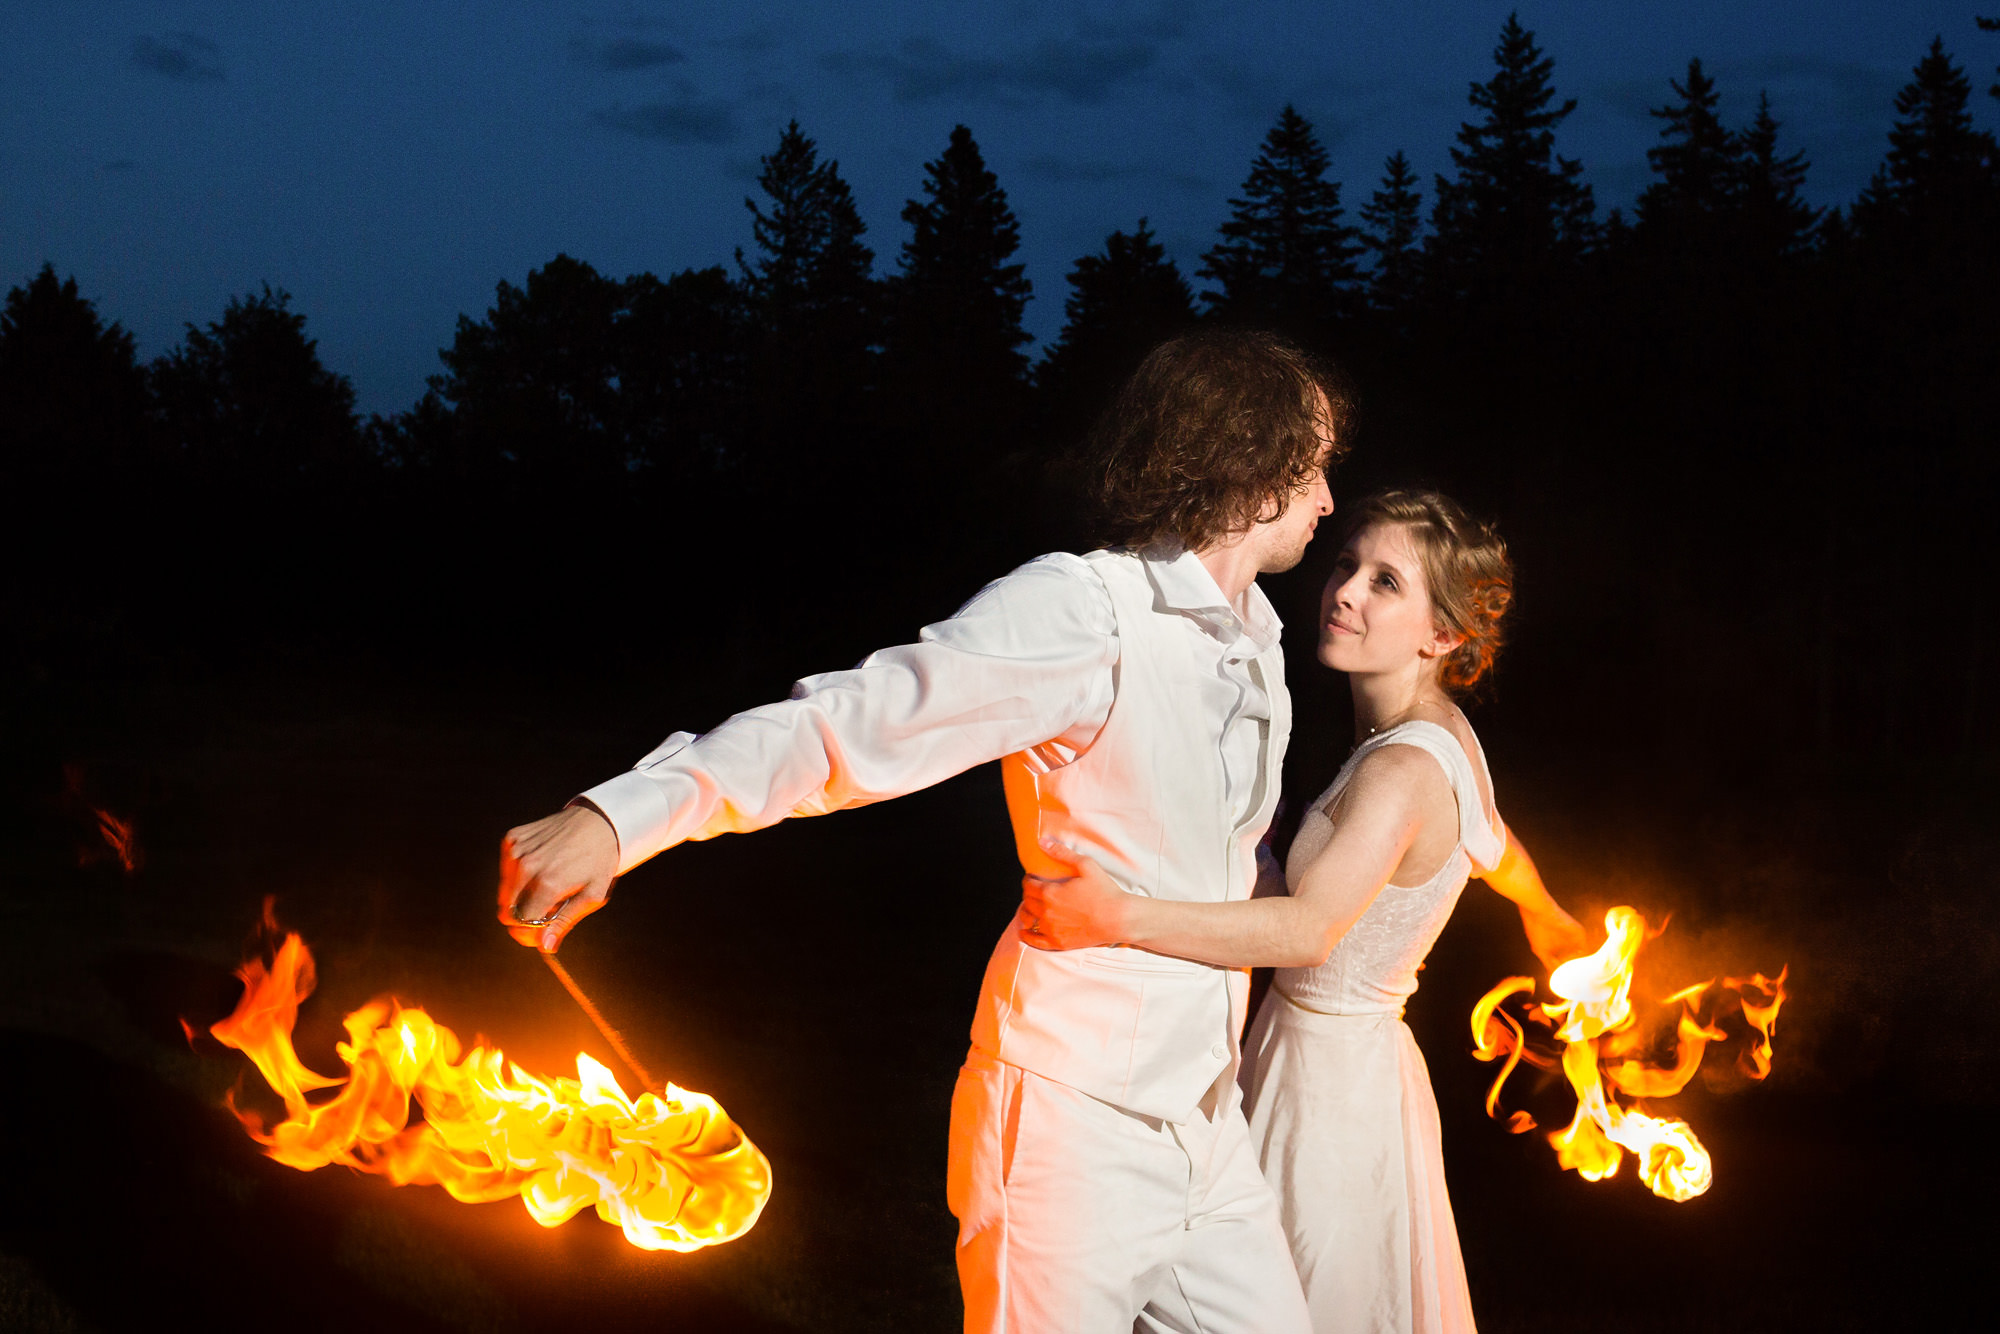 A wedding couple does a fire dance at their wedding at twilight.